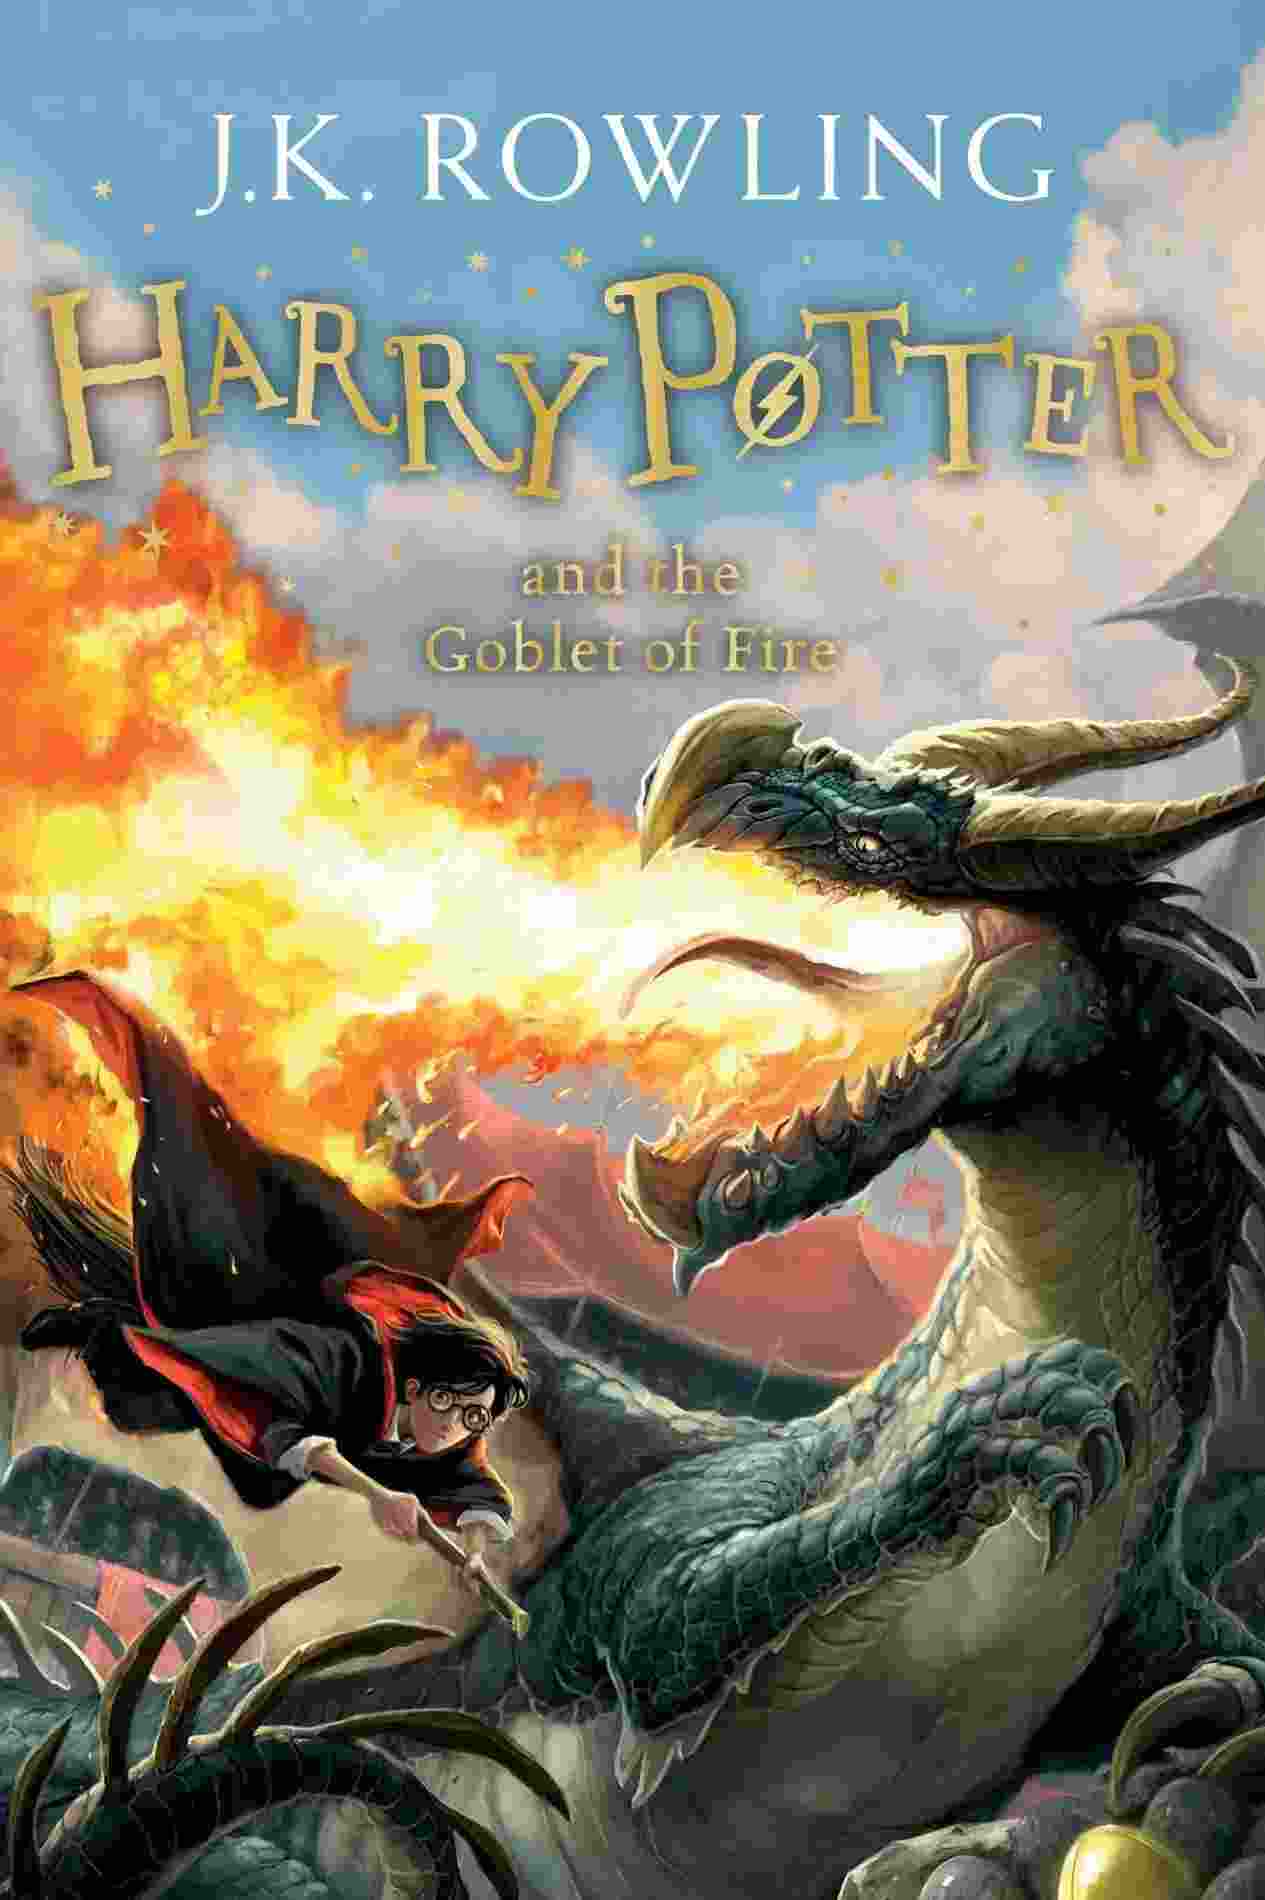 Book 4 – Stephen Fry: Harry Potter and the Goblet of Fire Audio Book